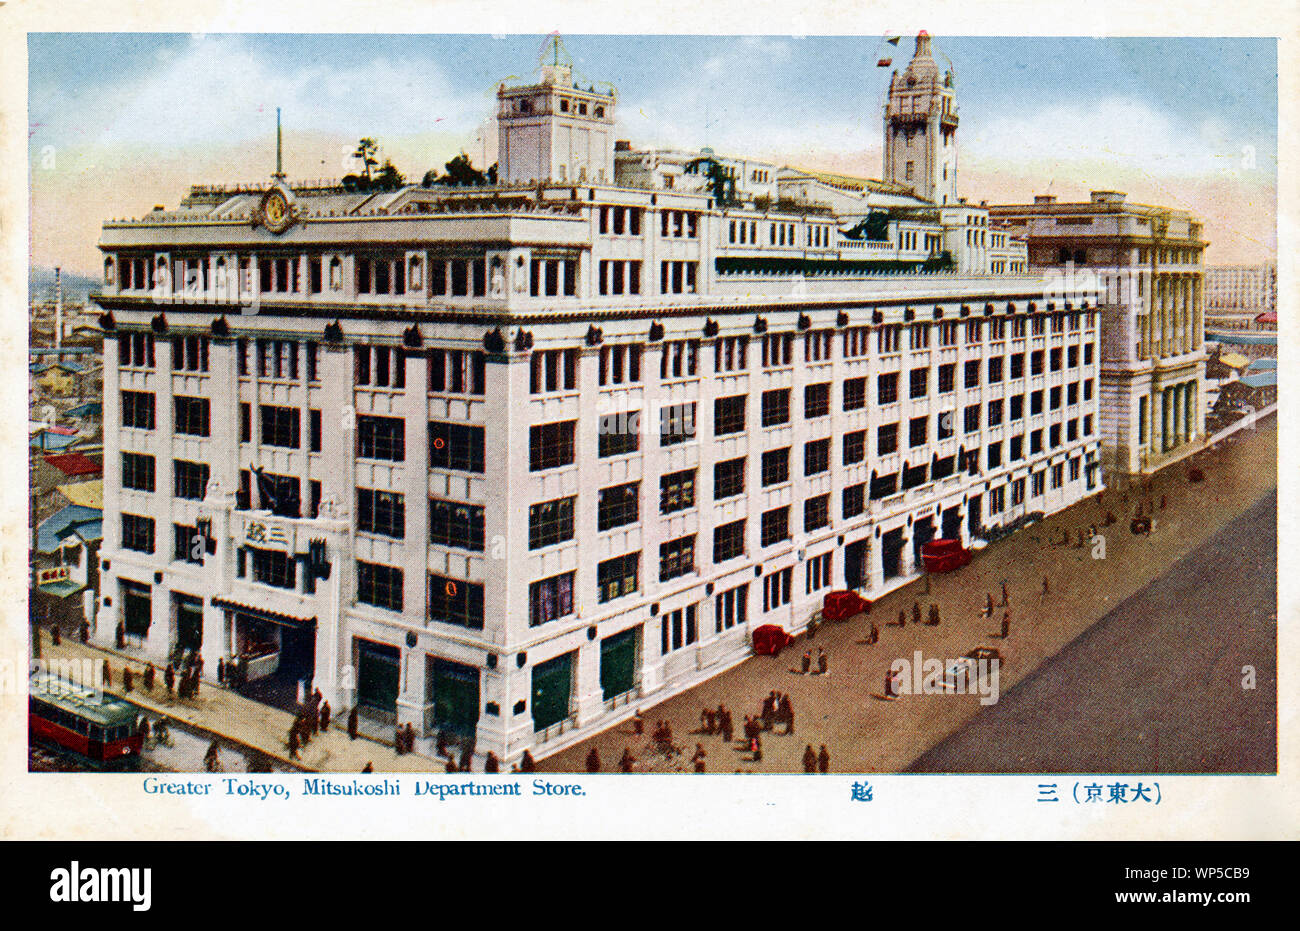 [ 1920s Japan - Western-Style Department Store ] —   The main Mitsukoshi Department Store in Nihonbashi, Tokyo.   Mitsukoshi was founded in 1673 as Echigoya. Daimaru was Tokyo's first dry goods store, and Shirokiya Tokyo's first Western-style department store (1886), but Mitsukoshi had some of the best locations. First in Nihonbashi, and later in Shinjuku (1929) and Ginza (1930).   The building on this image is the third Nihonbashi Mitsukoshi department store. It was built after the Great Kanto earthquake of 1923 and replaced a building dating from 1914 which had been destroyed by fire.  20th Stock Photo